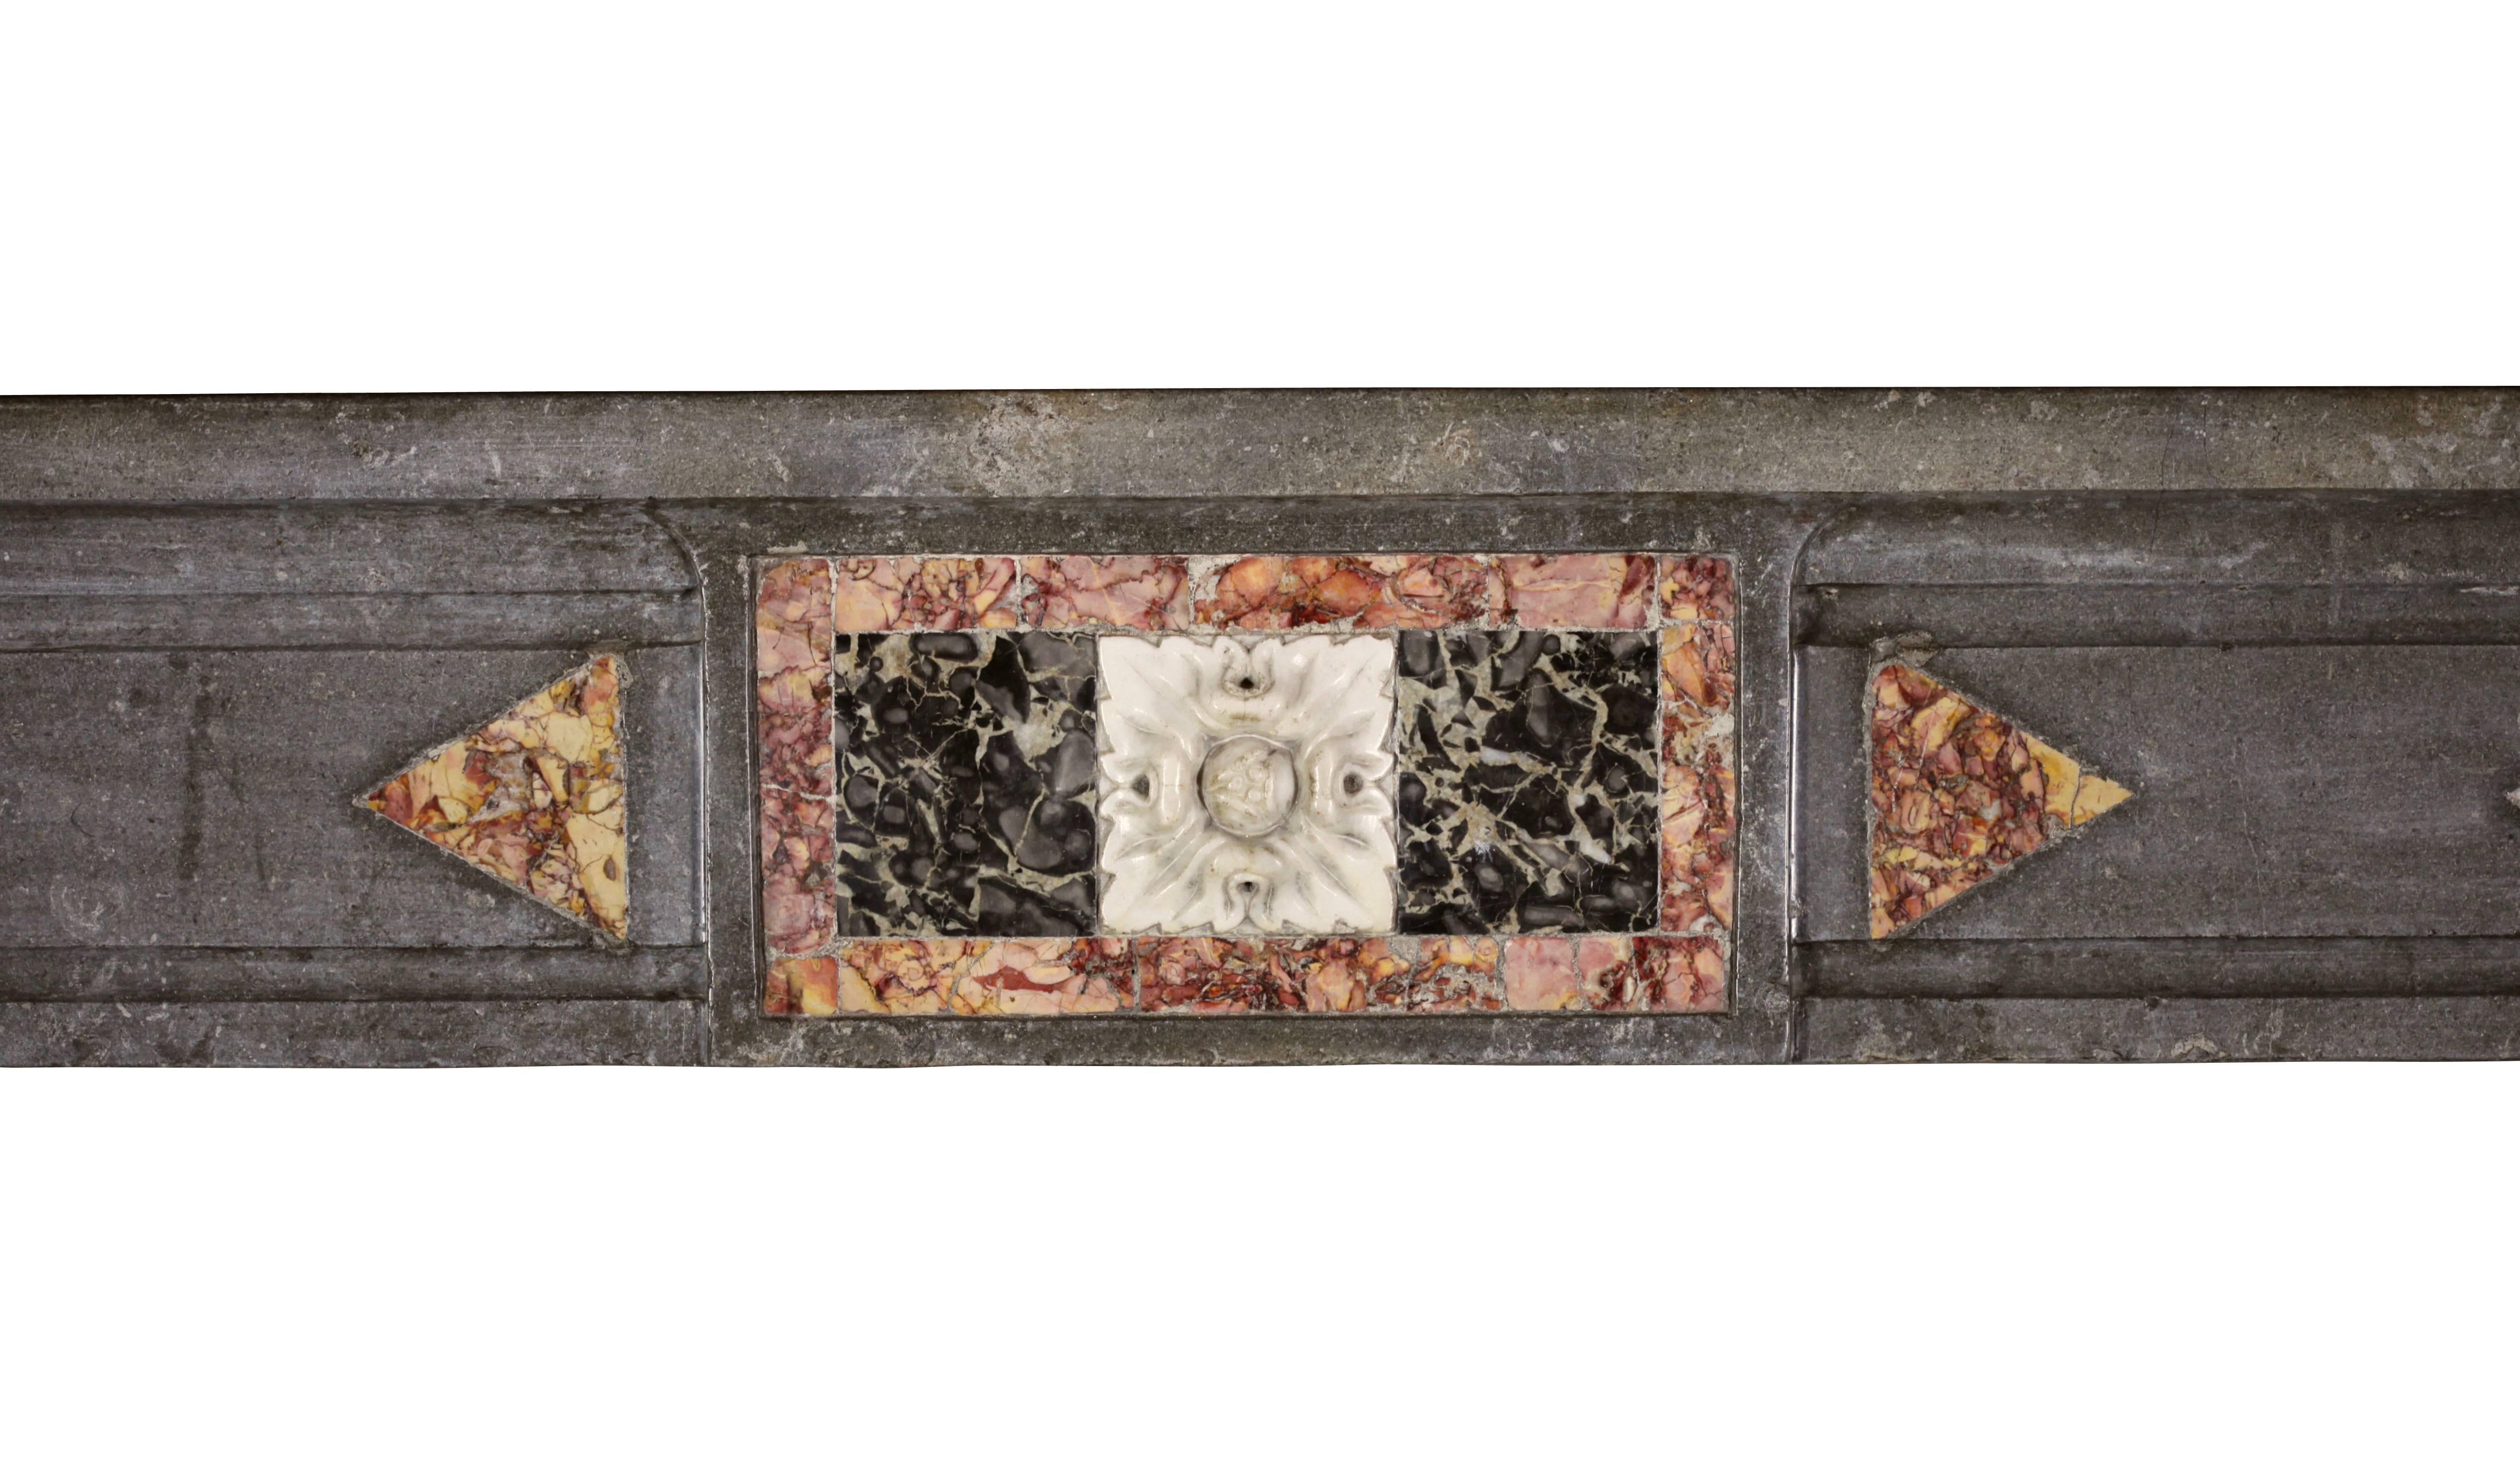 18th Century and Earlier Fine European Rustic Antique Fireplace Surround with Marble Inlays For Sale